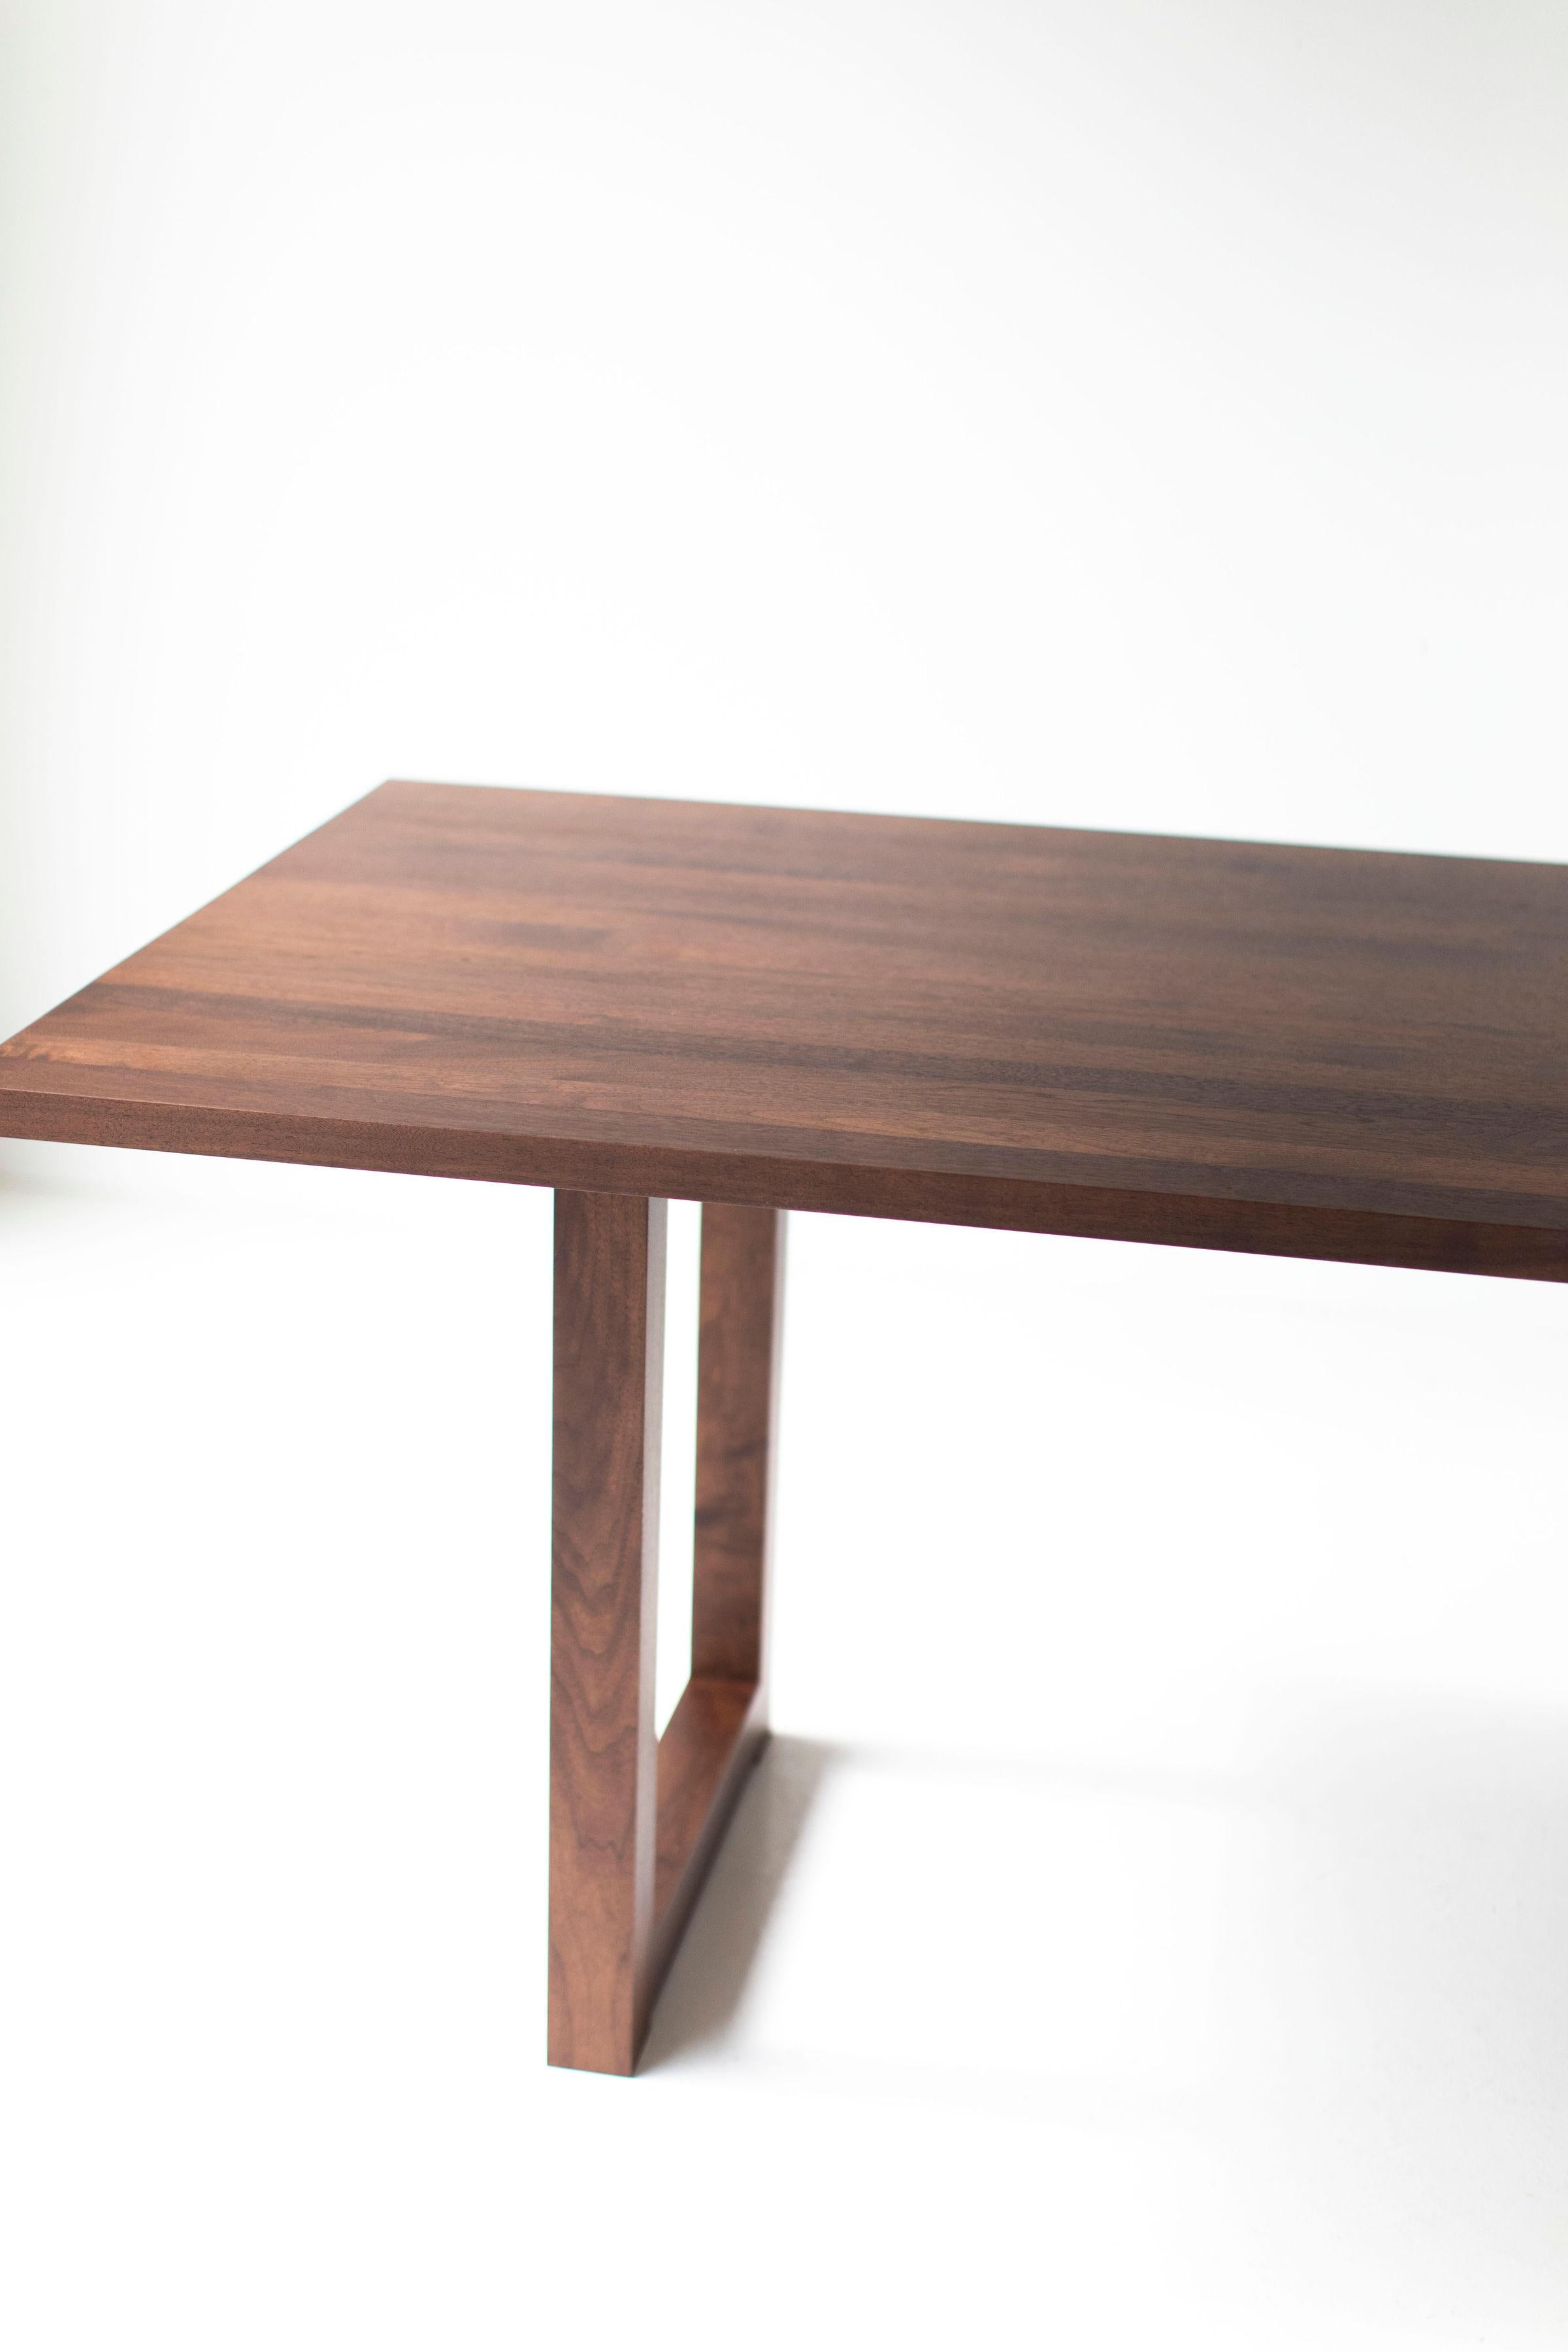 Simple Modern Dining Table, Walnut In New Condition For Sale In Oak Harbor, OH